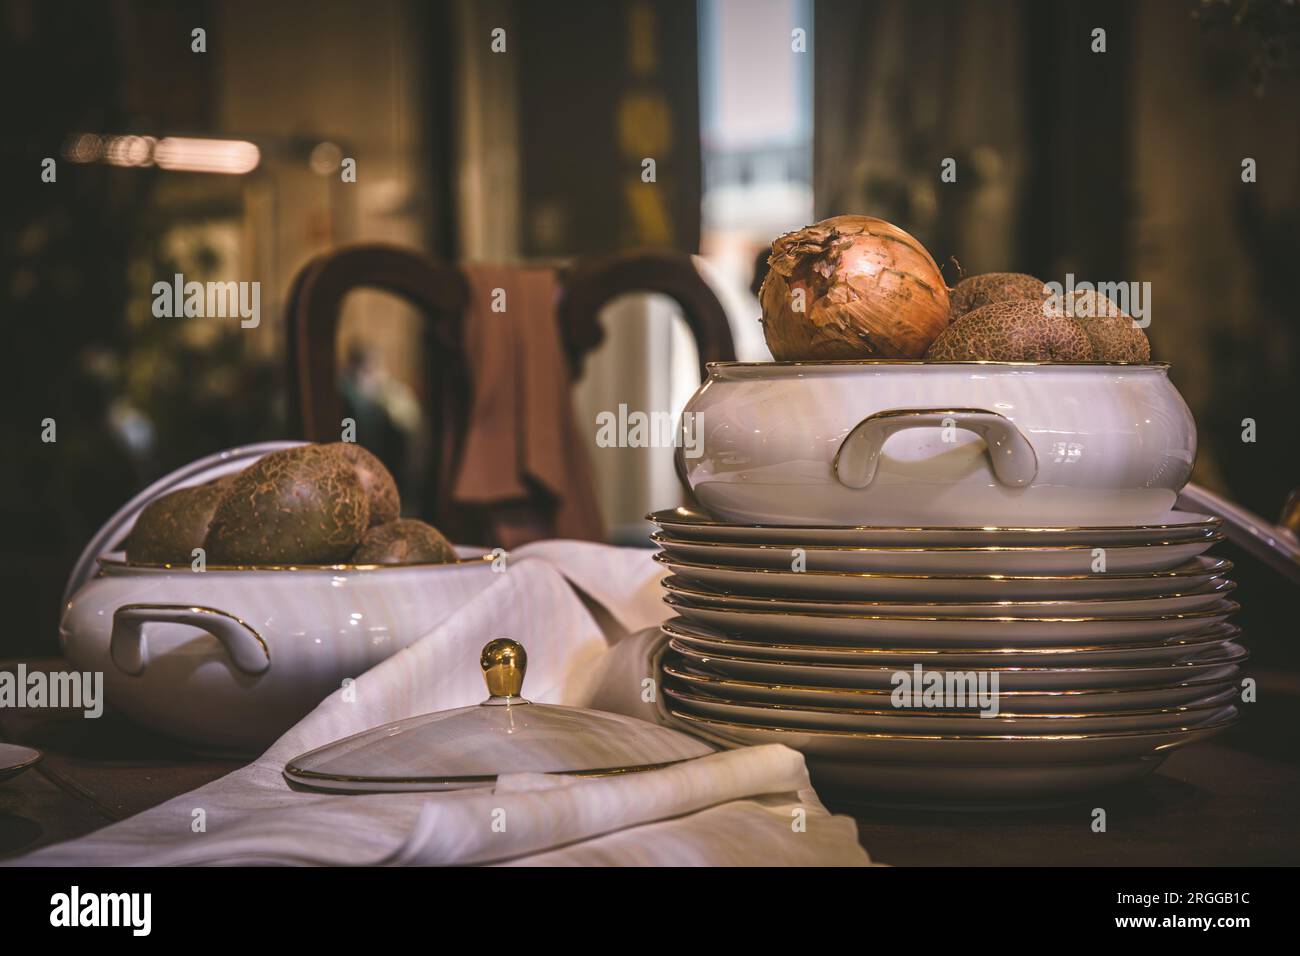 Stacked plates with gold rim and bowl with onions on an old wooden table Stock Photo